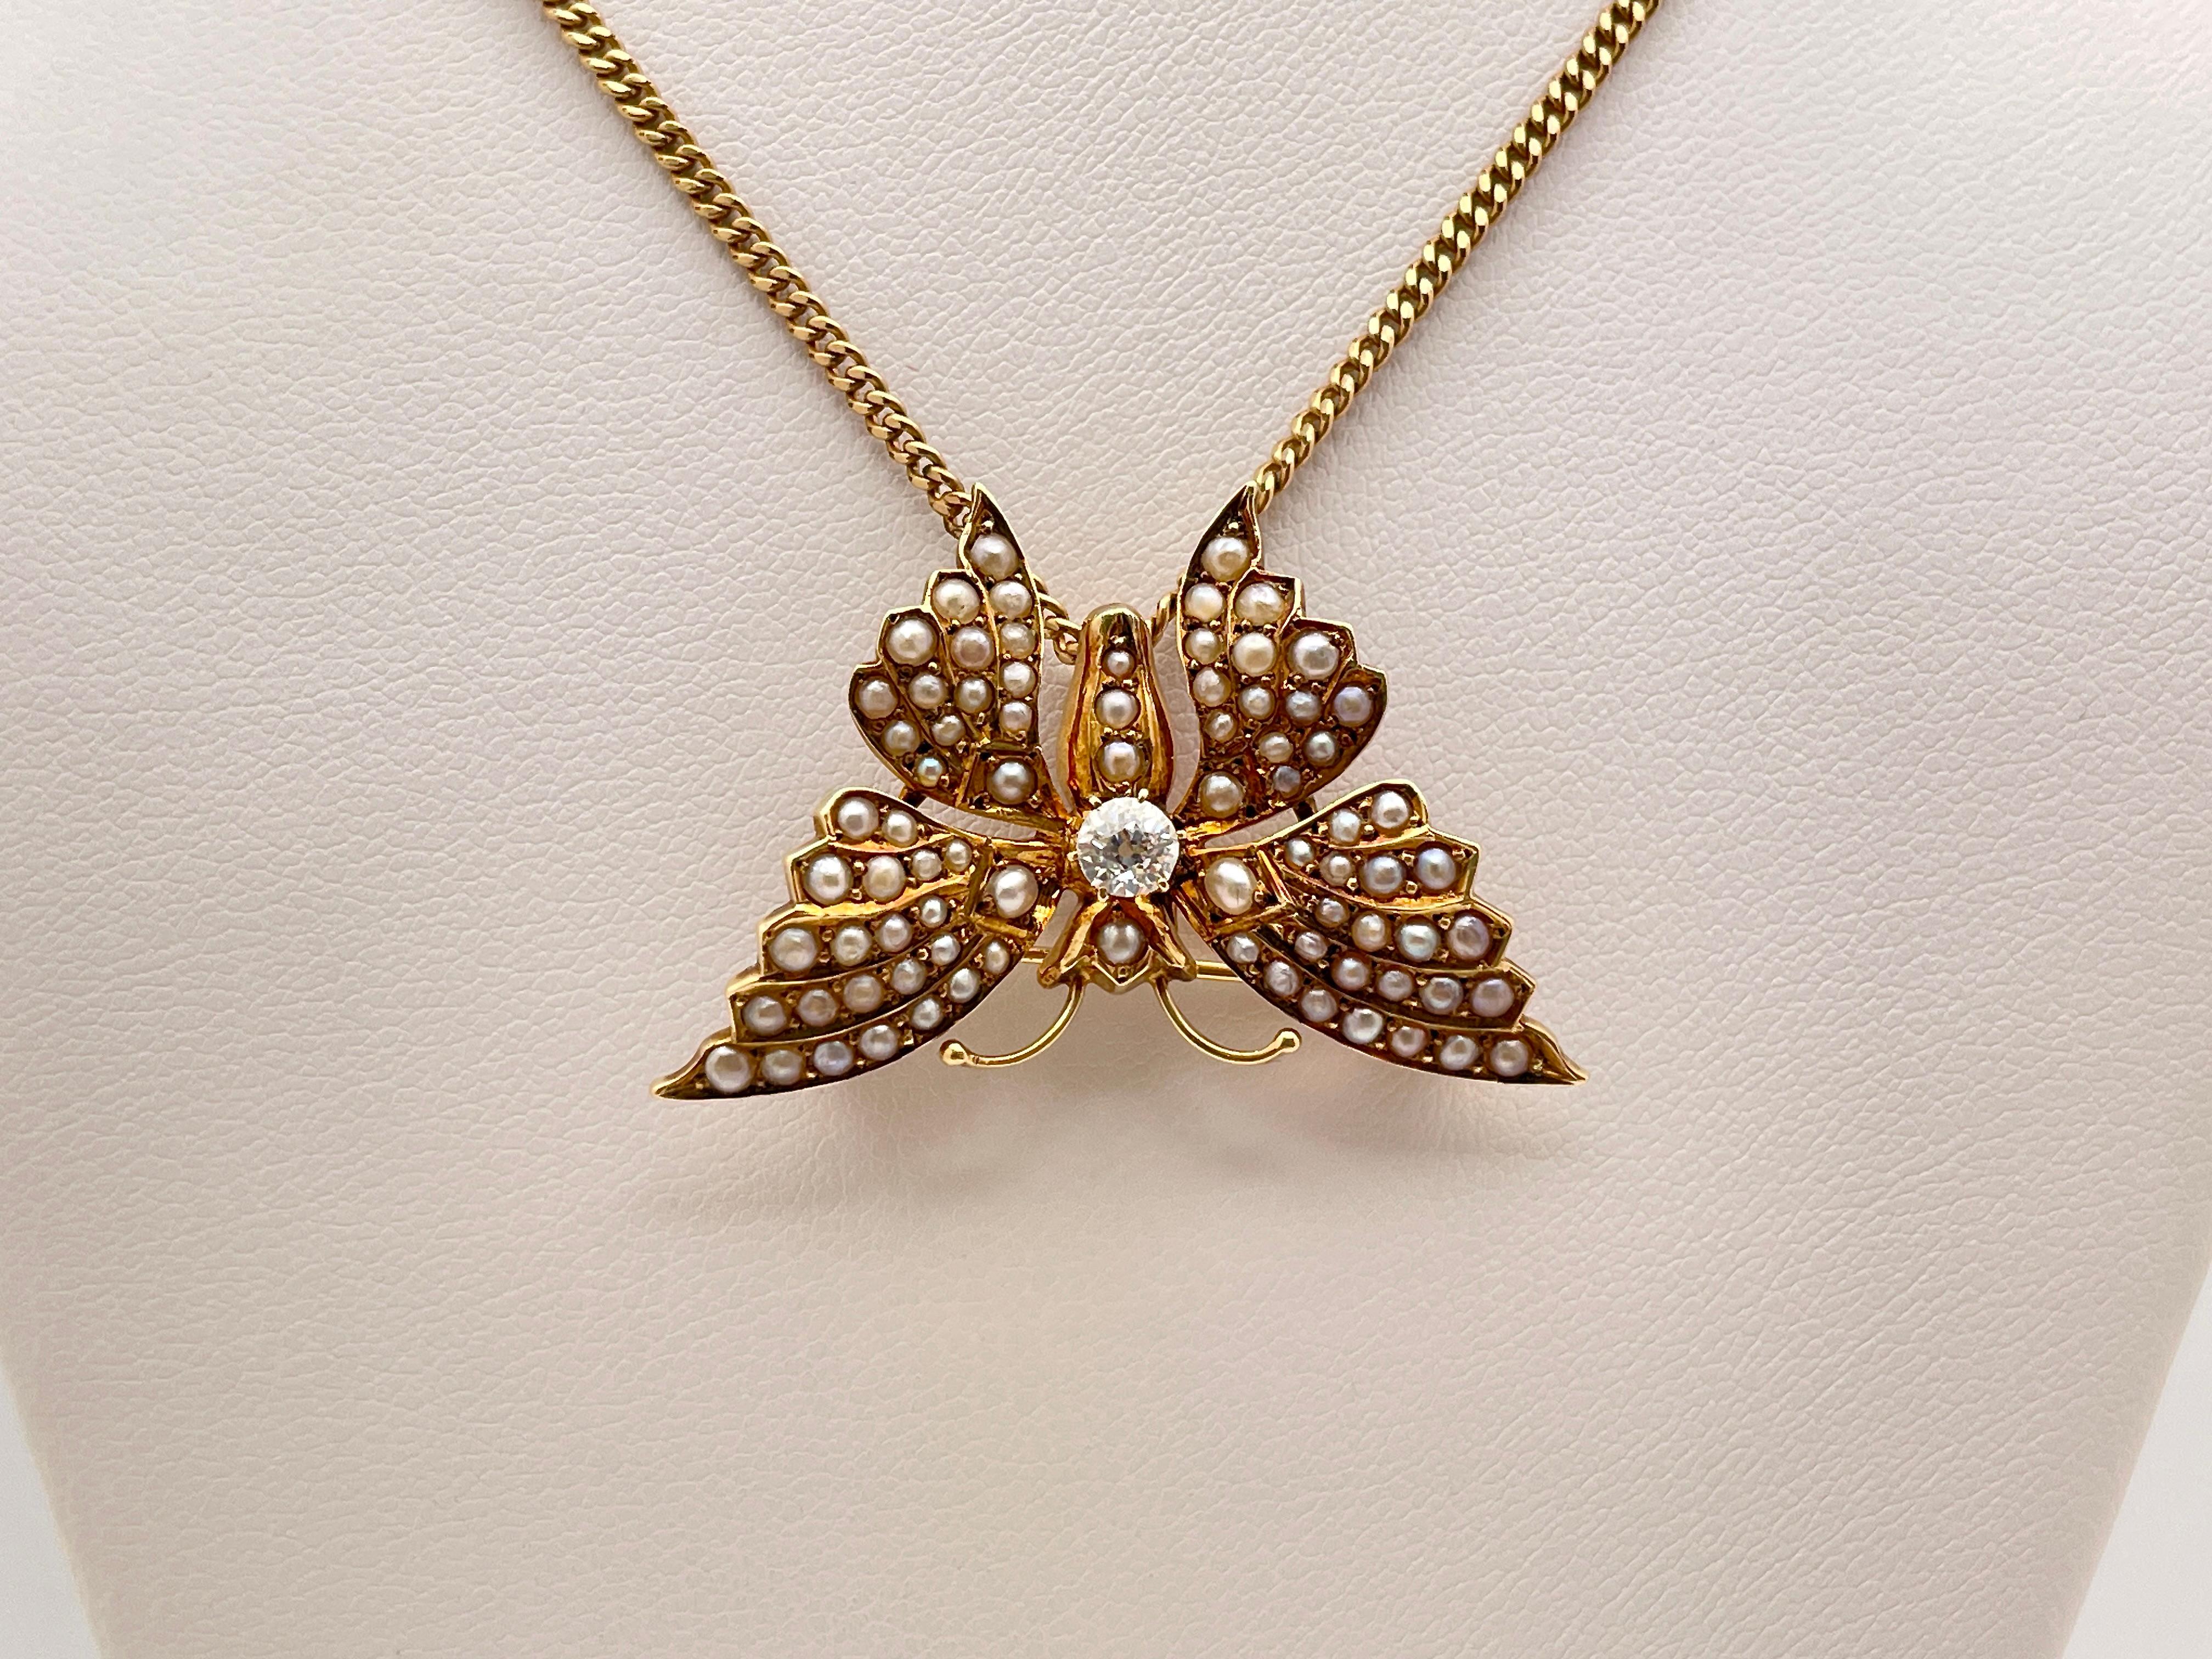 An original Victorian 14K yellow gold diamond and pearl butterfly brooch (pin/pendant). Decorated with round white pearls and centered with an old European cut diamond weighing approximately 0.40 CT, E color, VS1 clarity. The pin on the back is 10K